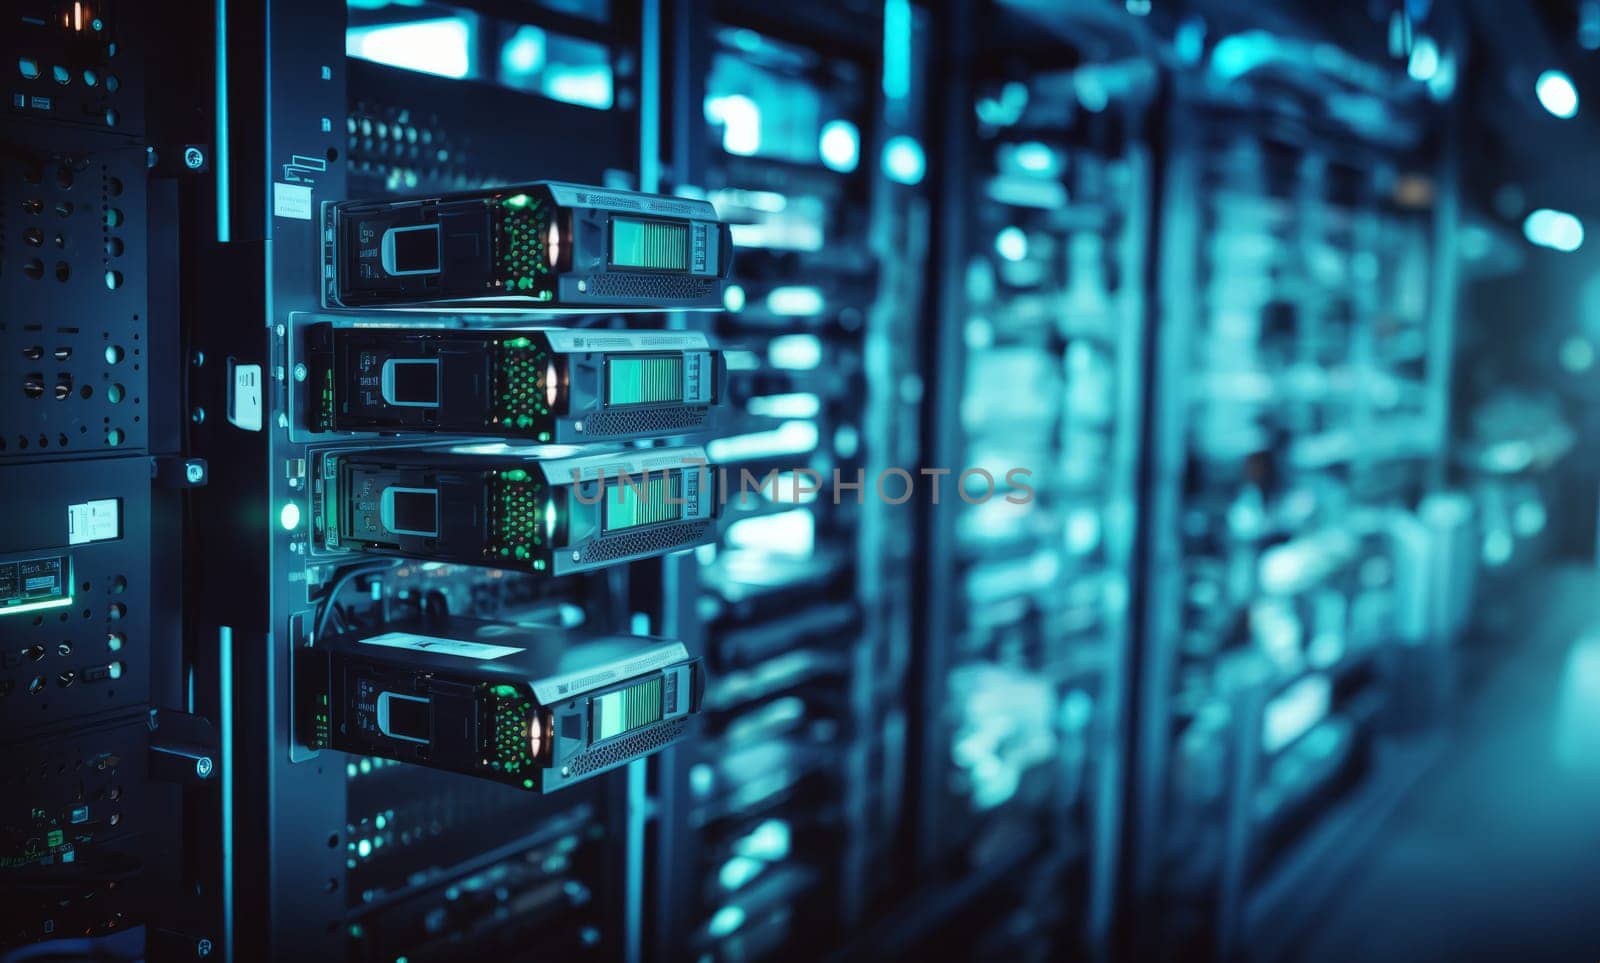 A close-up photograph showcases modern blue computers in a server room, illustrating the technological infrastructure of data management and communication networks.Generated image by dotshock